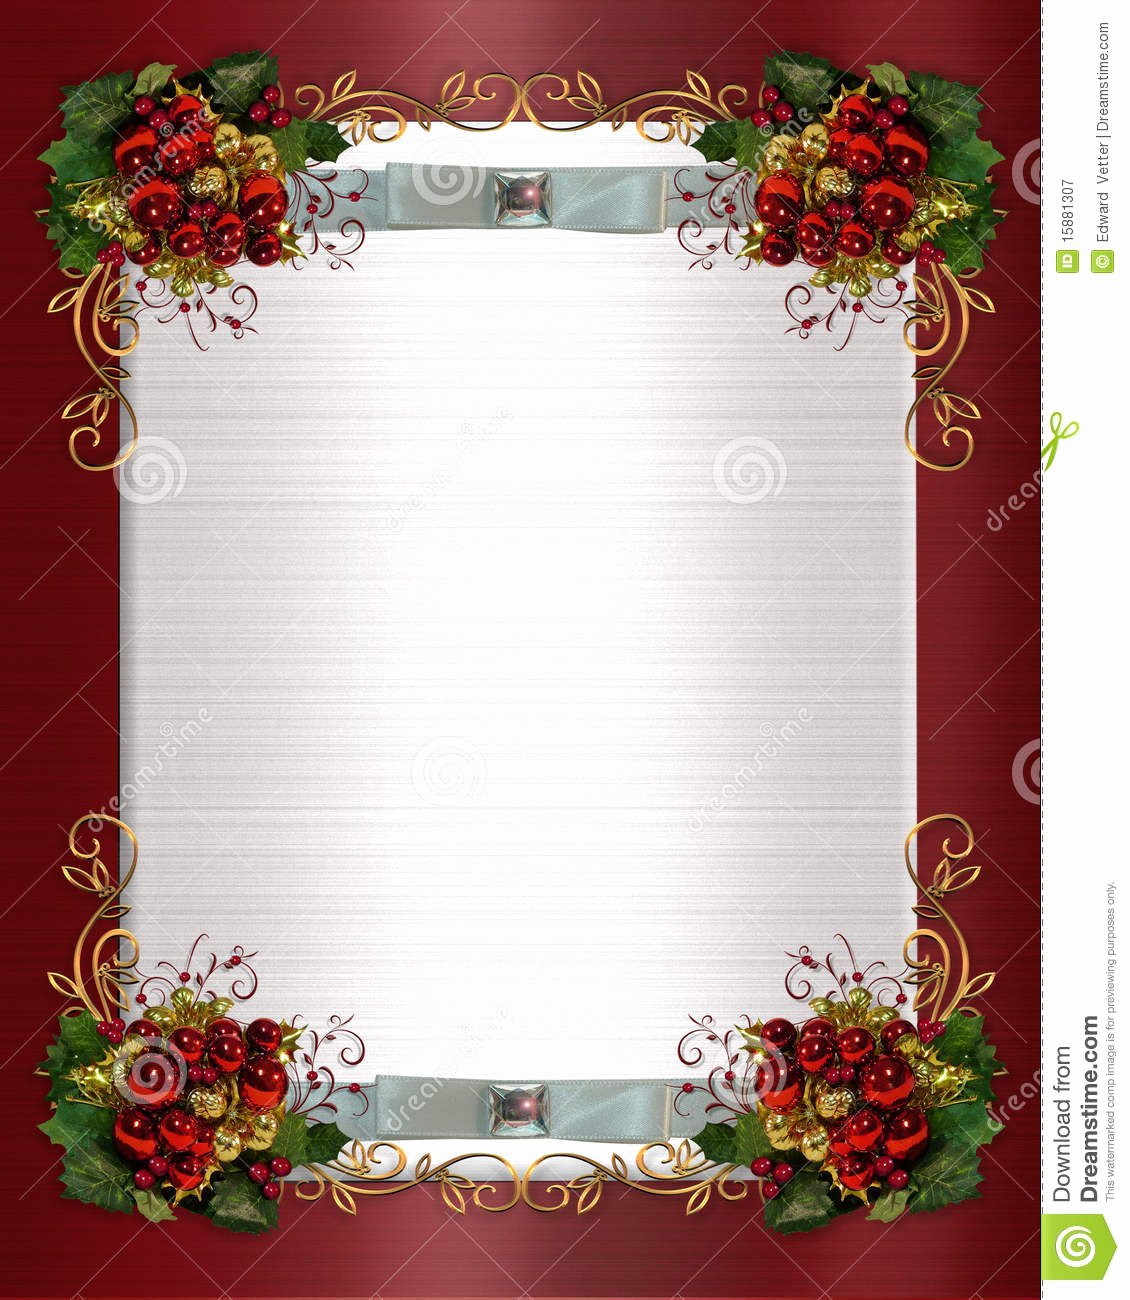 Christmas Party Invitation Templates Free Download